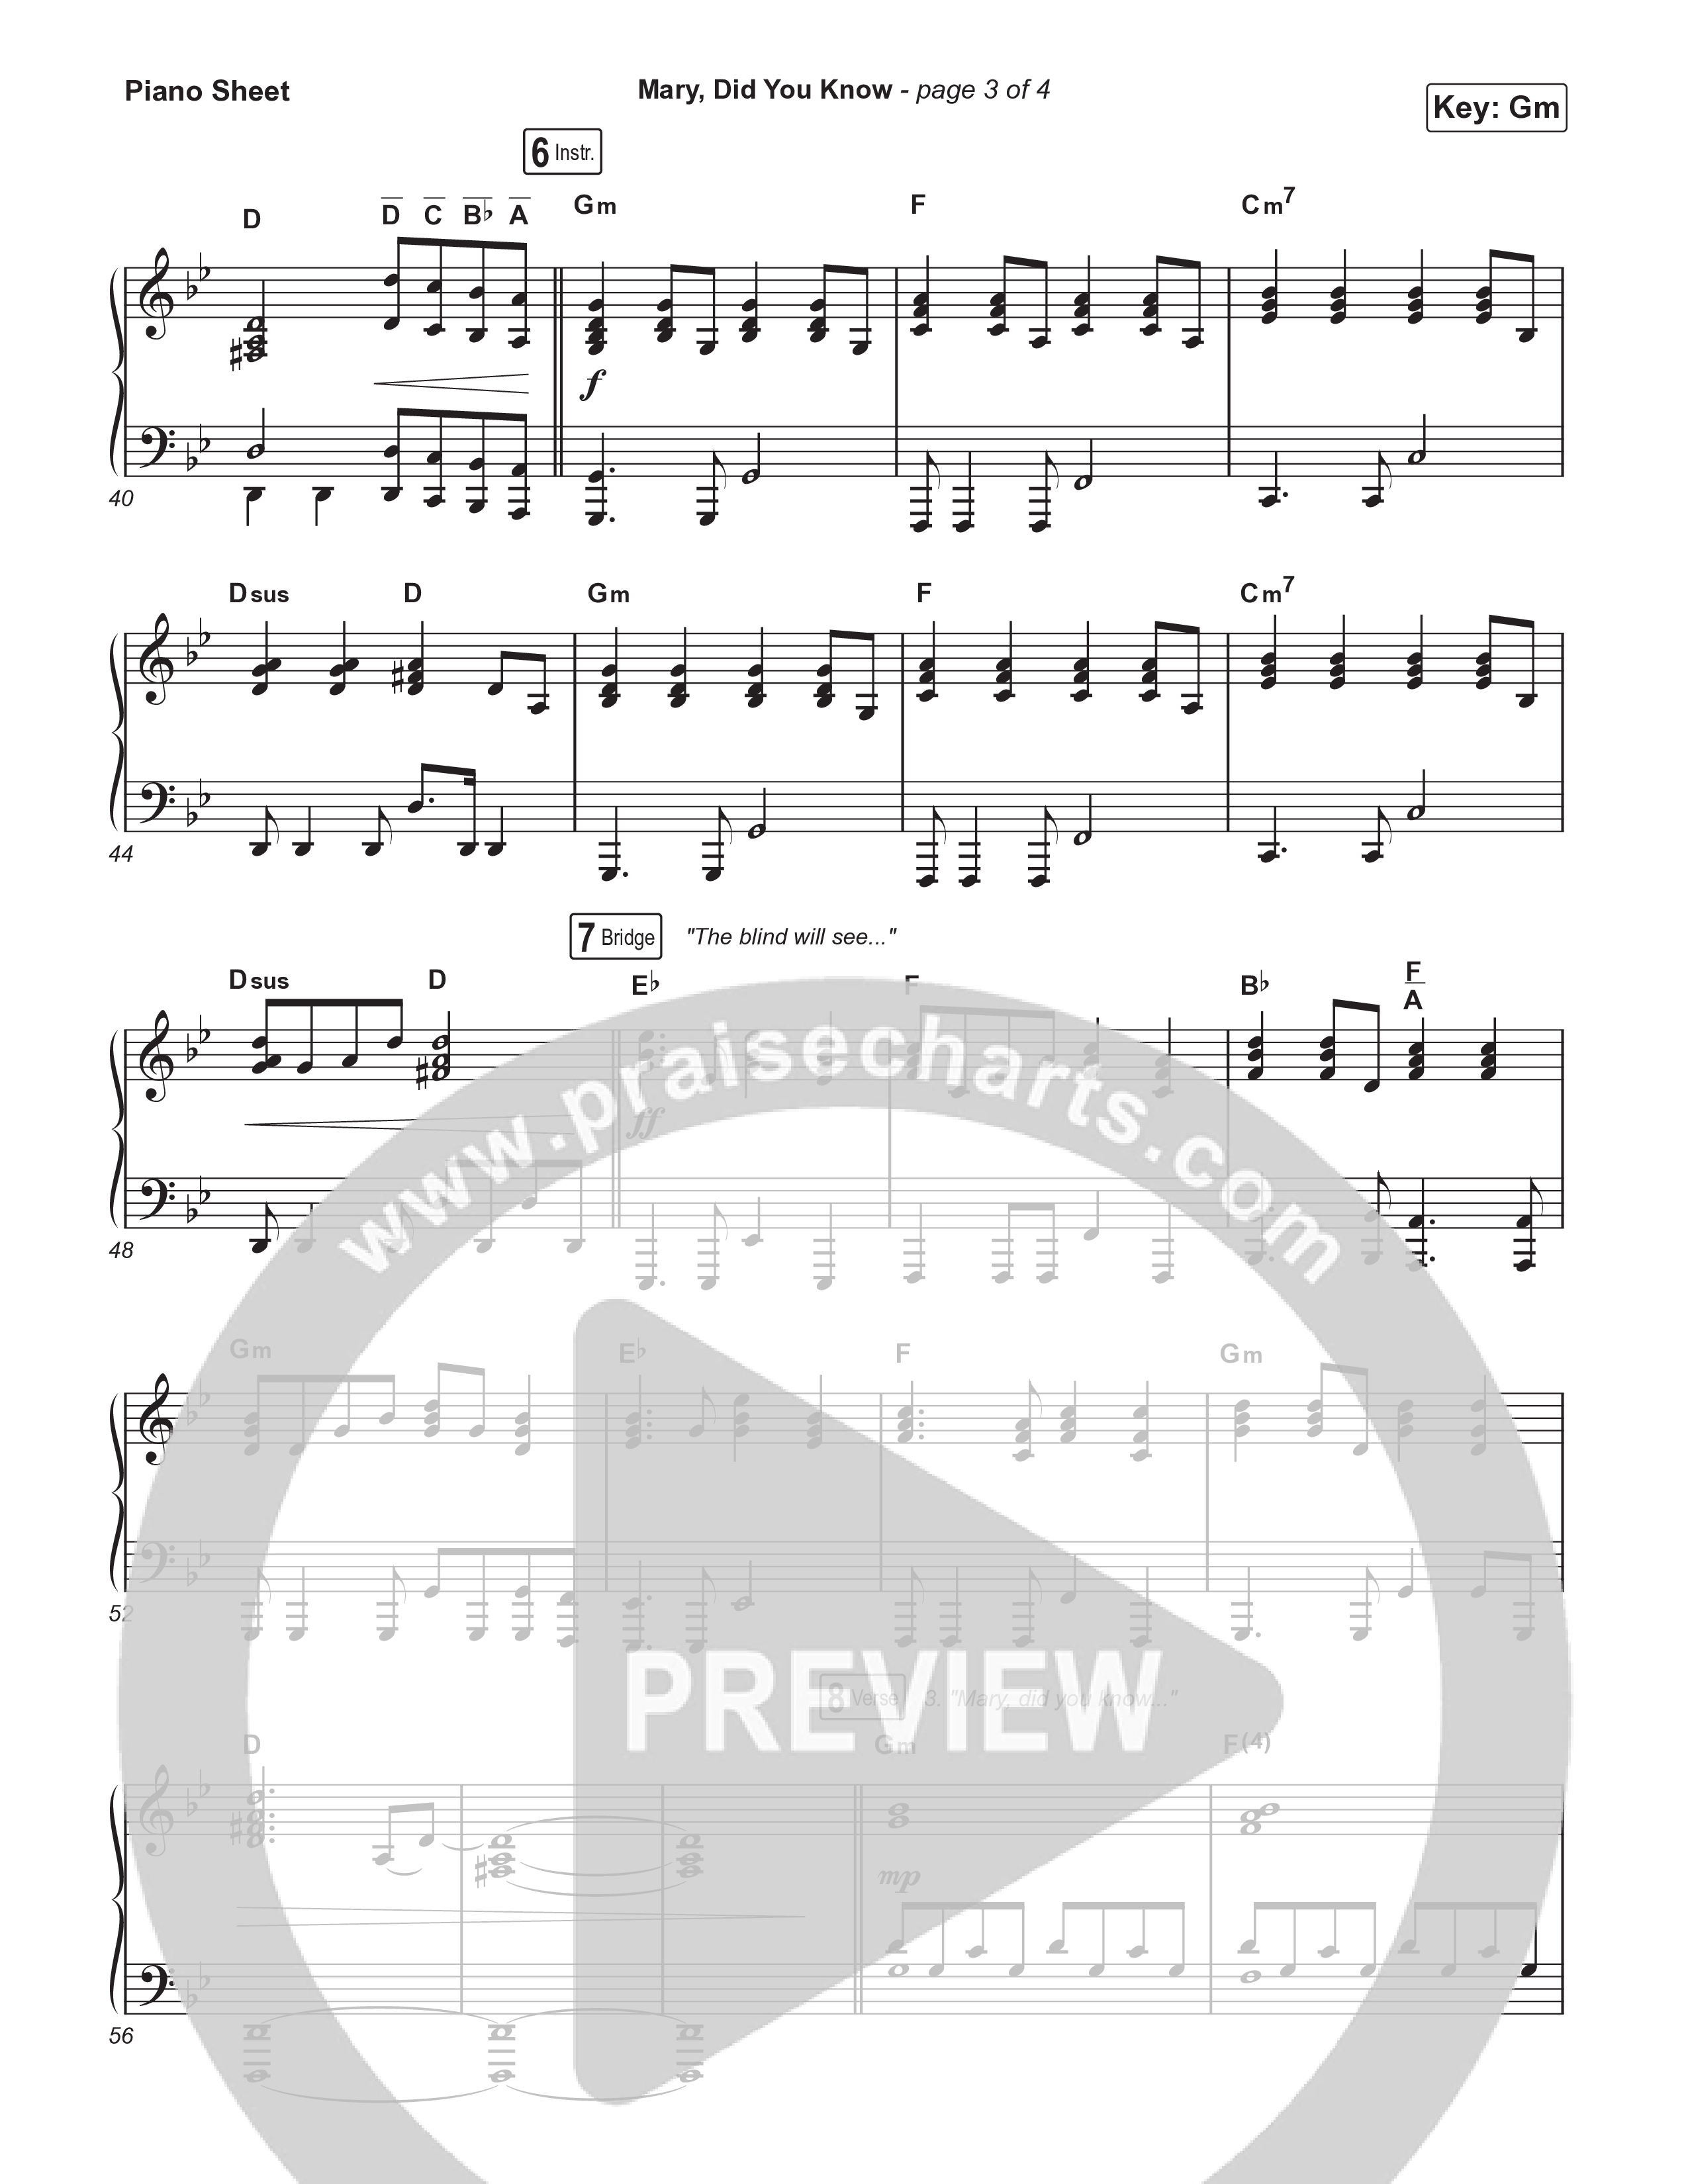 Mary Did You Know (Choral Anthem SATB) Piano Sheet (Anne Wilson / Arr. Luke Gambill)